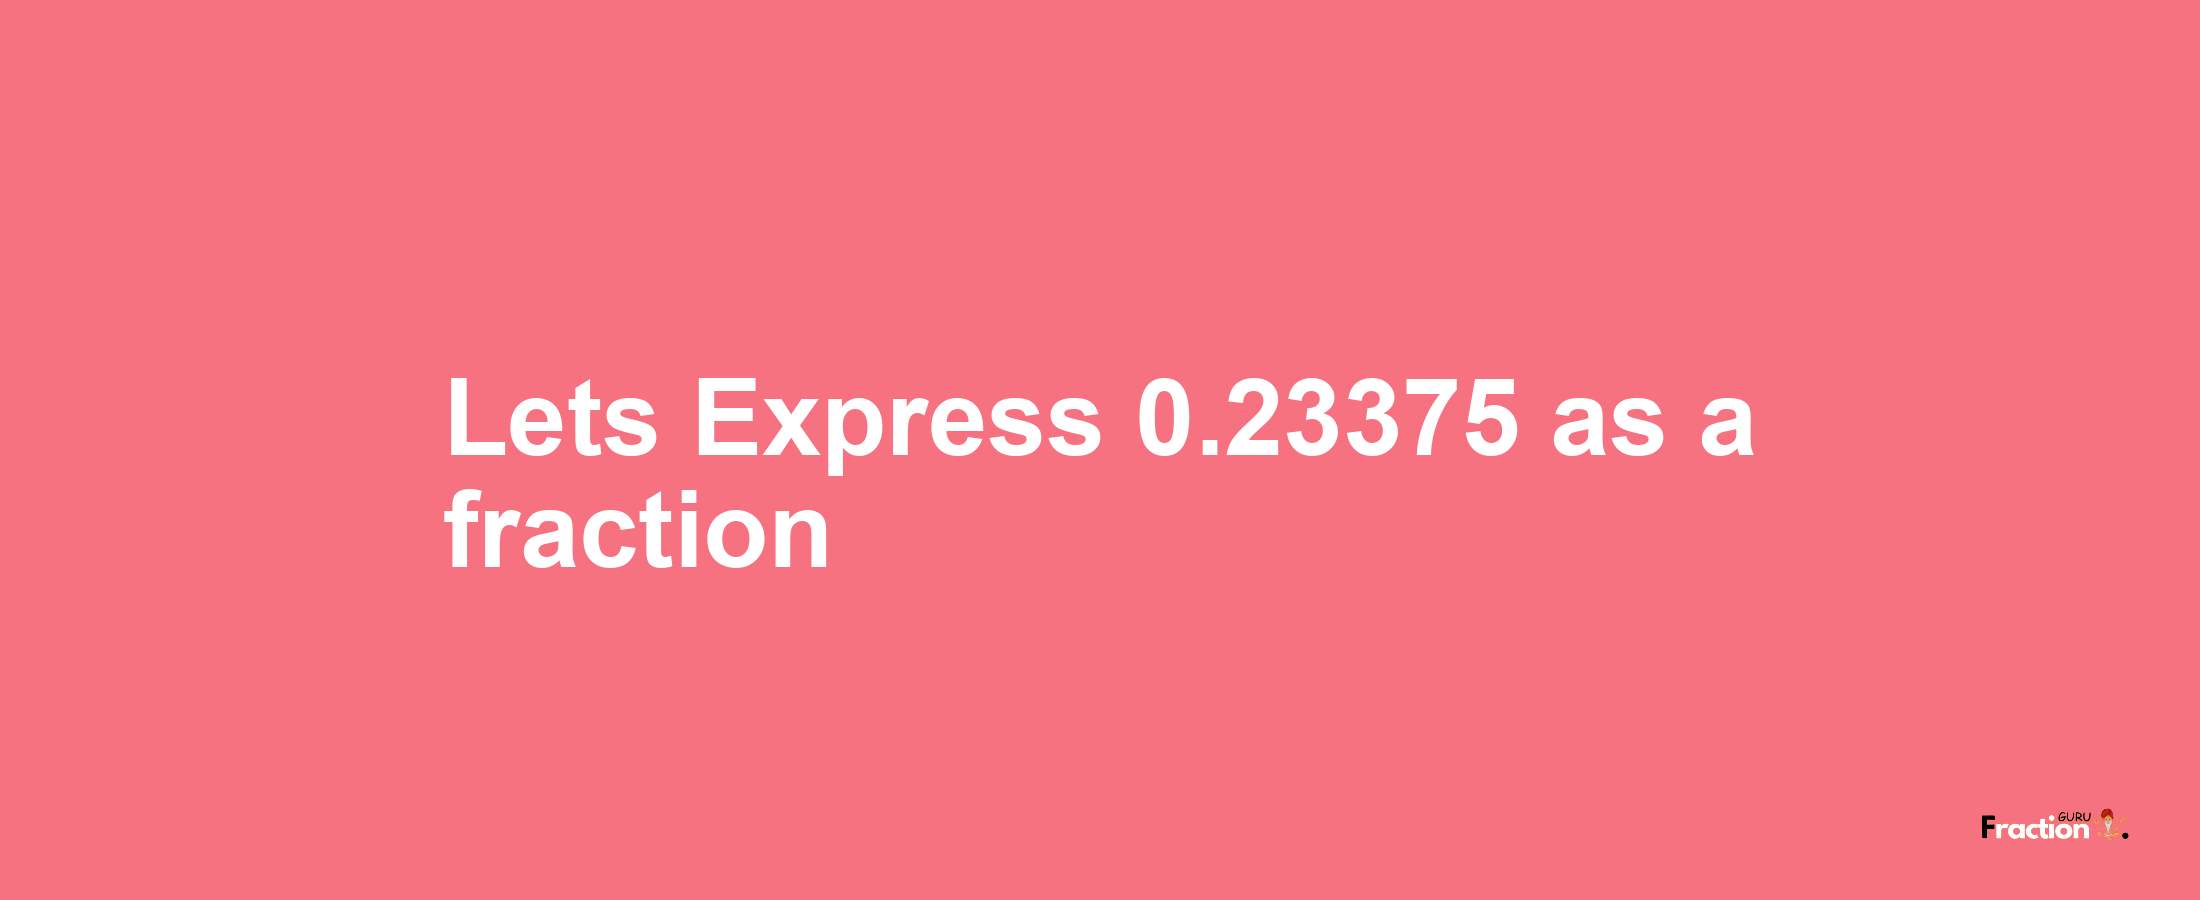 Lets Express 0.23375 as afraction